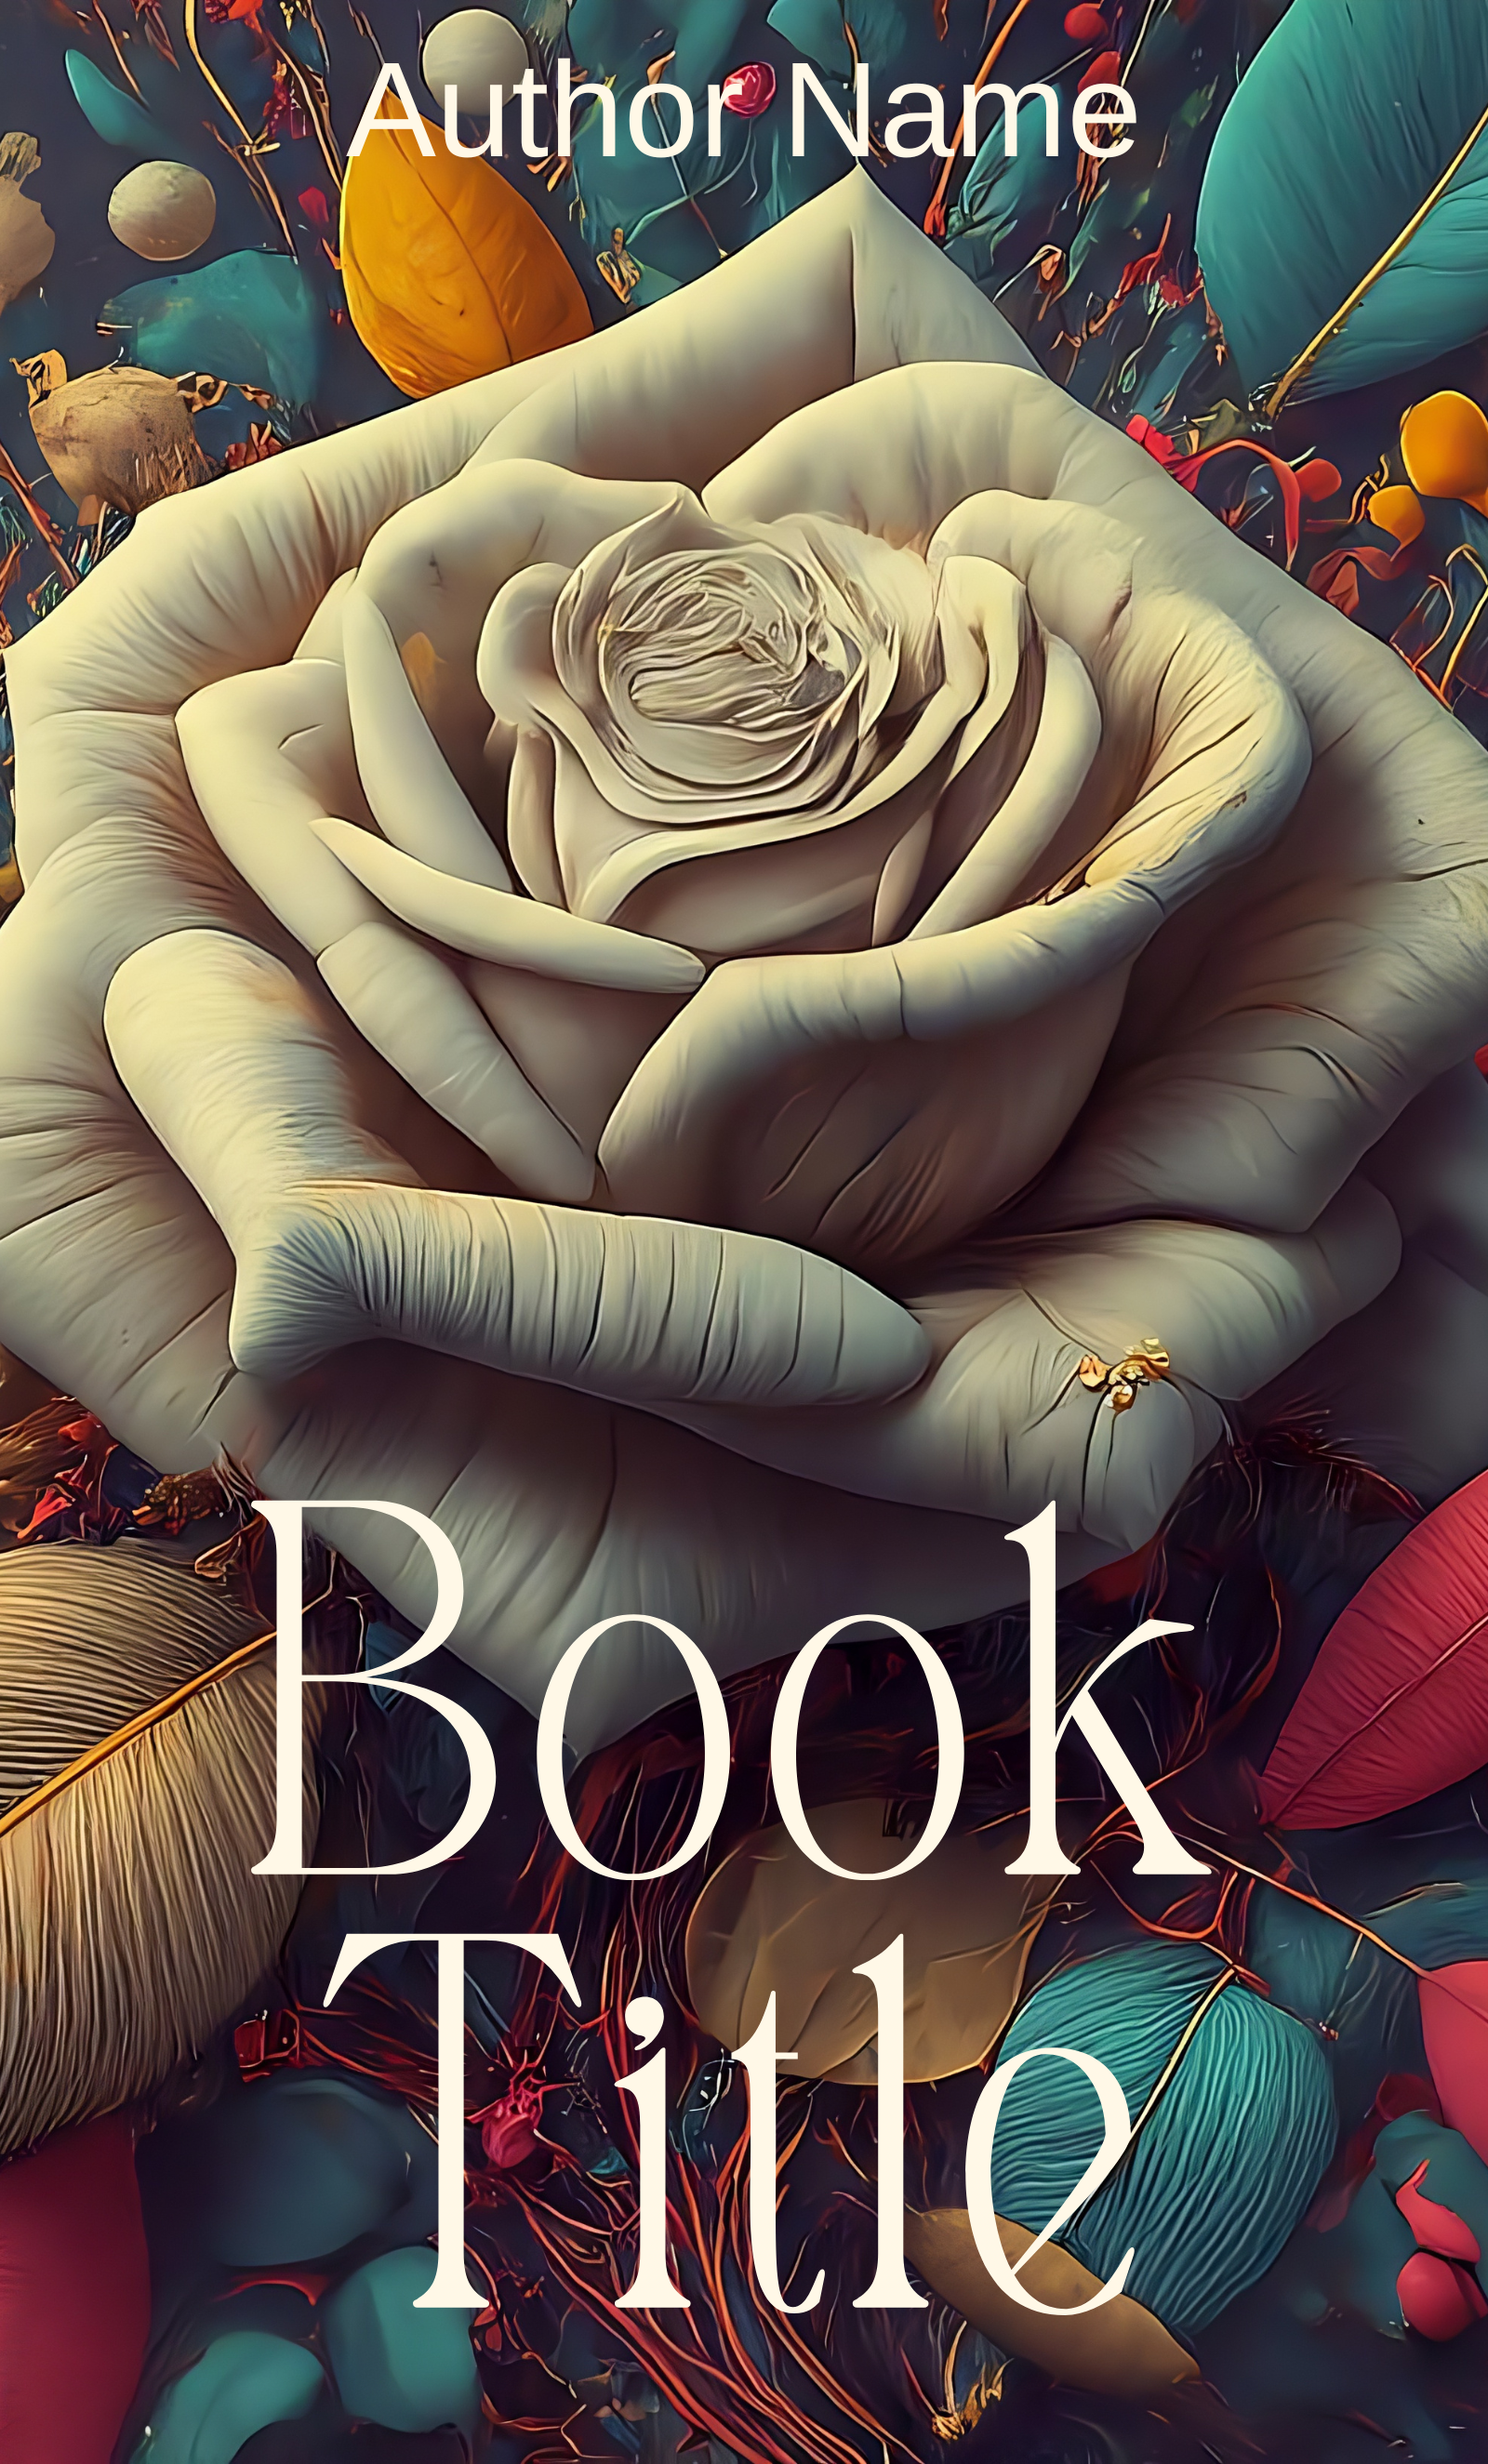 Premade Book Cover: White Rose: Illustrated botanical of a white rose. Suitable for romance, drama or literary fiction book covers. Includes paperback. BookSelf